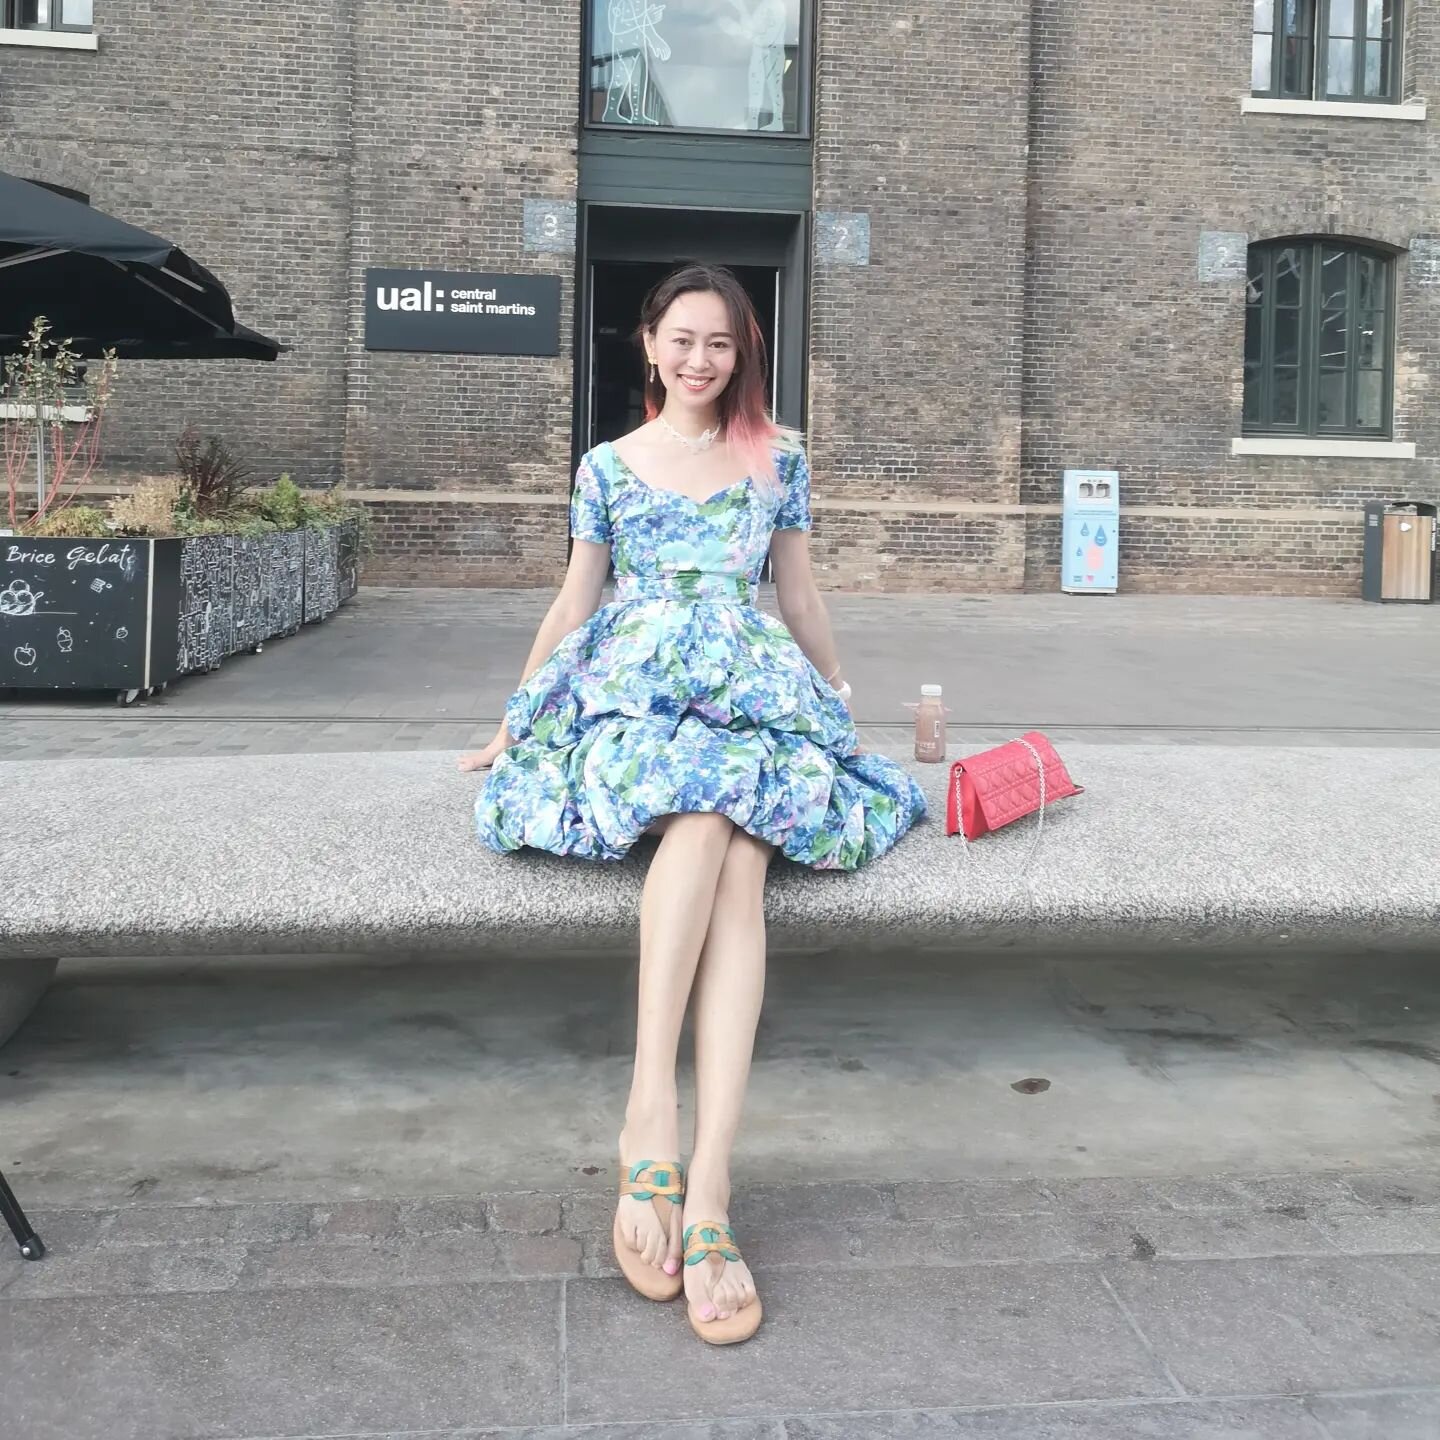 Central st-martins in Kings Cross is an always best place to take pictures!